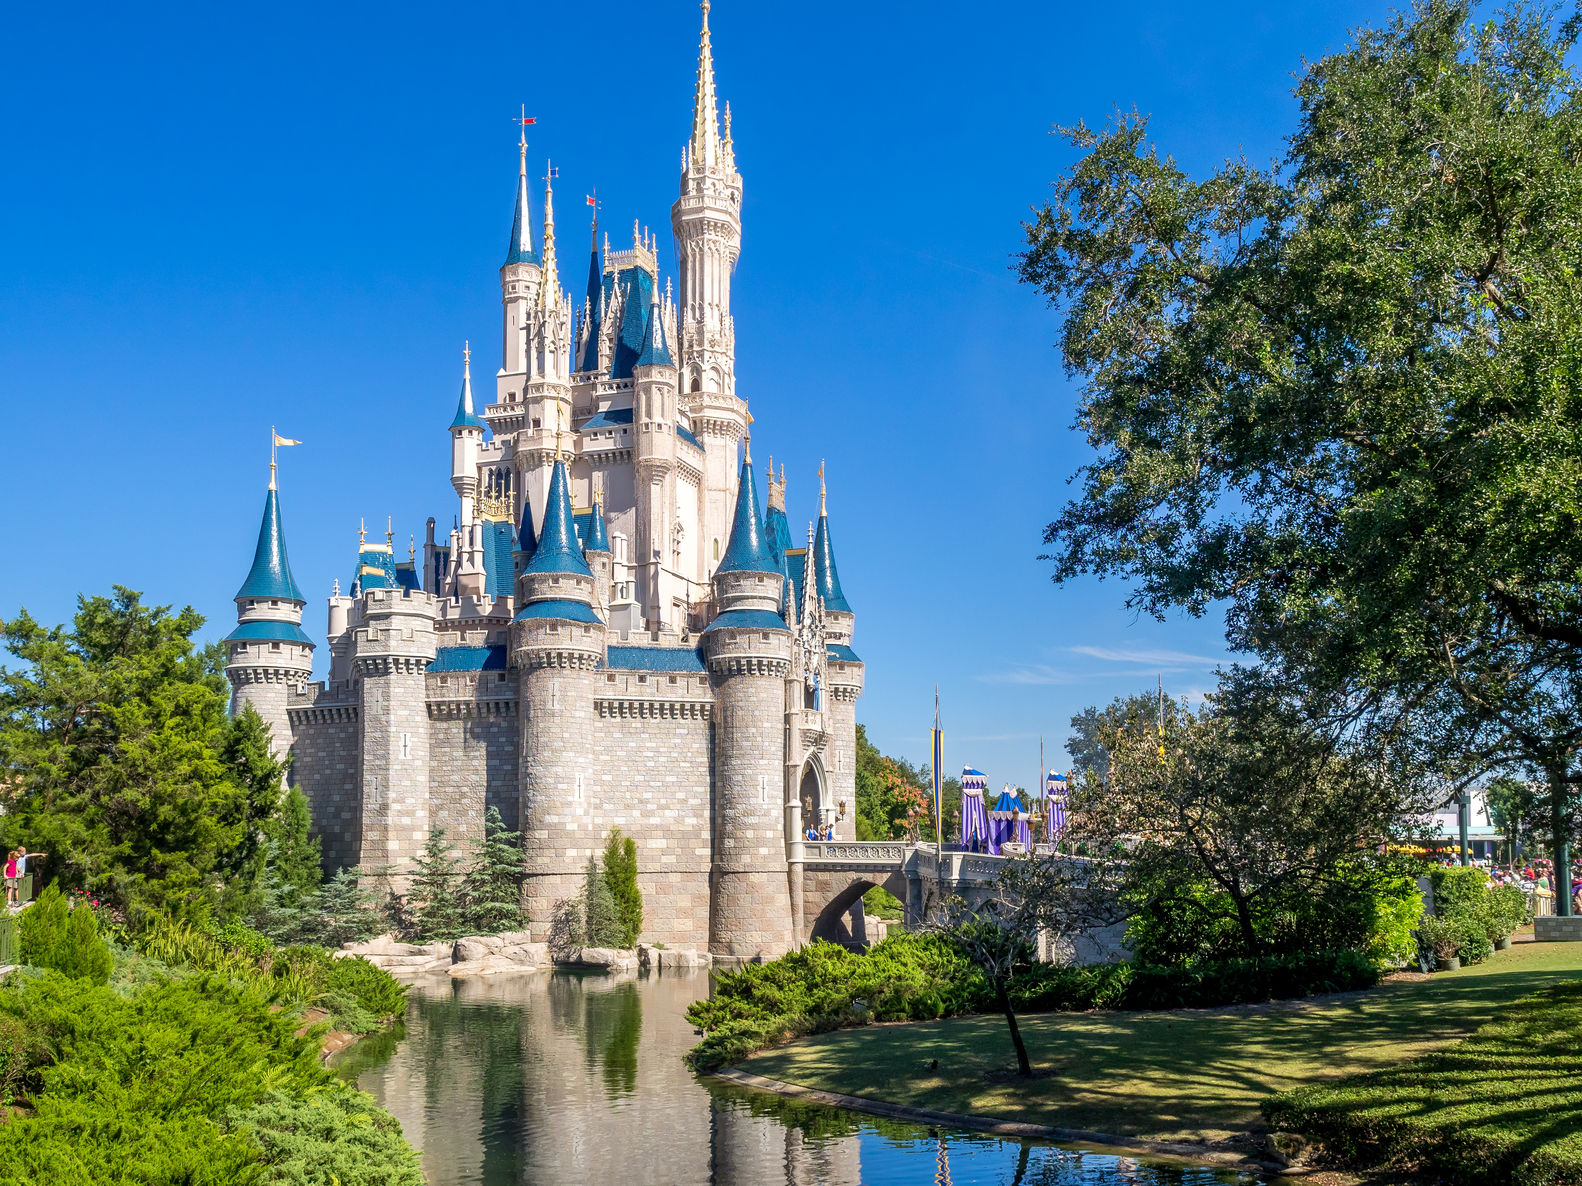 10 Tips to Prepare for Your Family's First Trip to Disney World - You've booked your trip. . .now what? Here are 10 ways to build some magic into your planning for a trip your family will never forget!